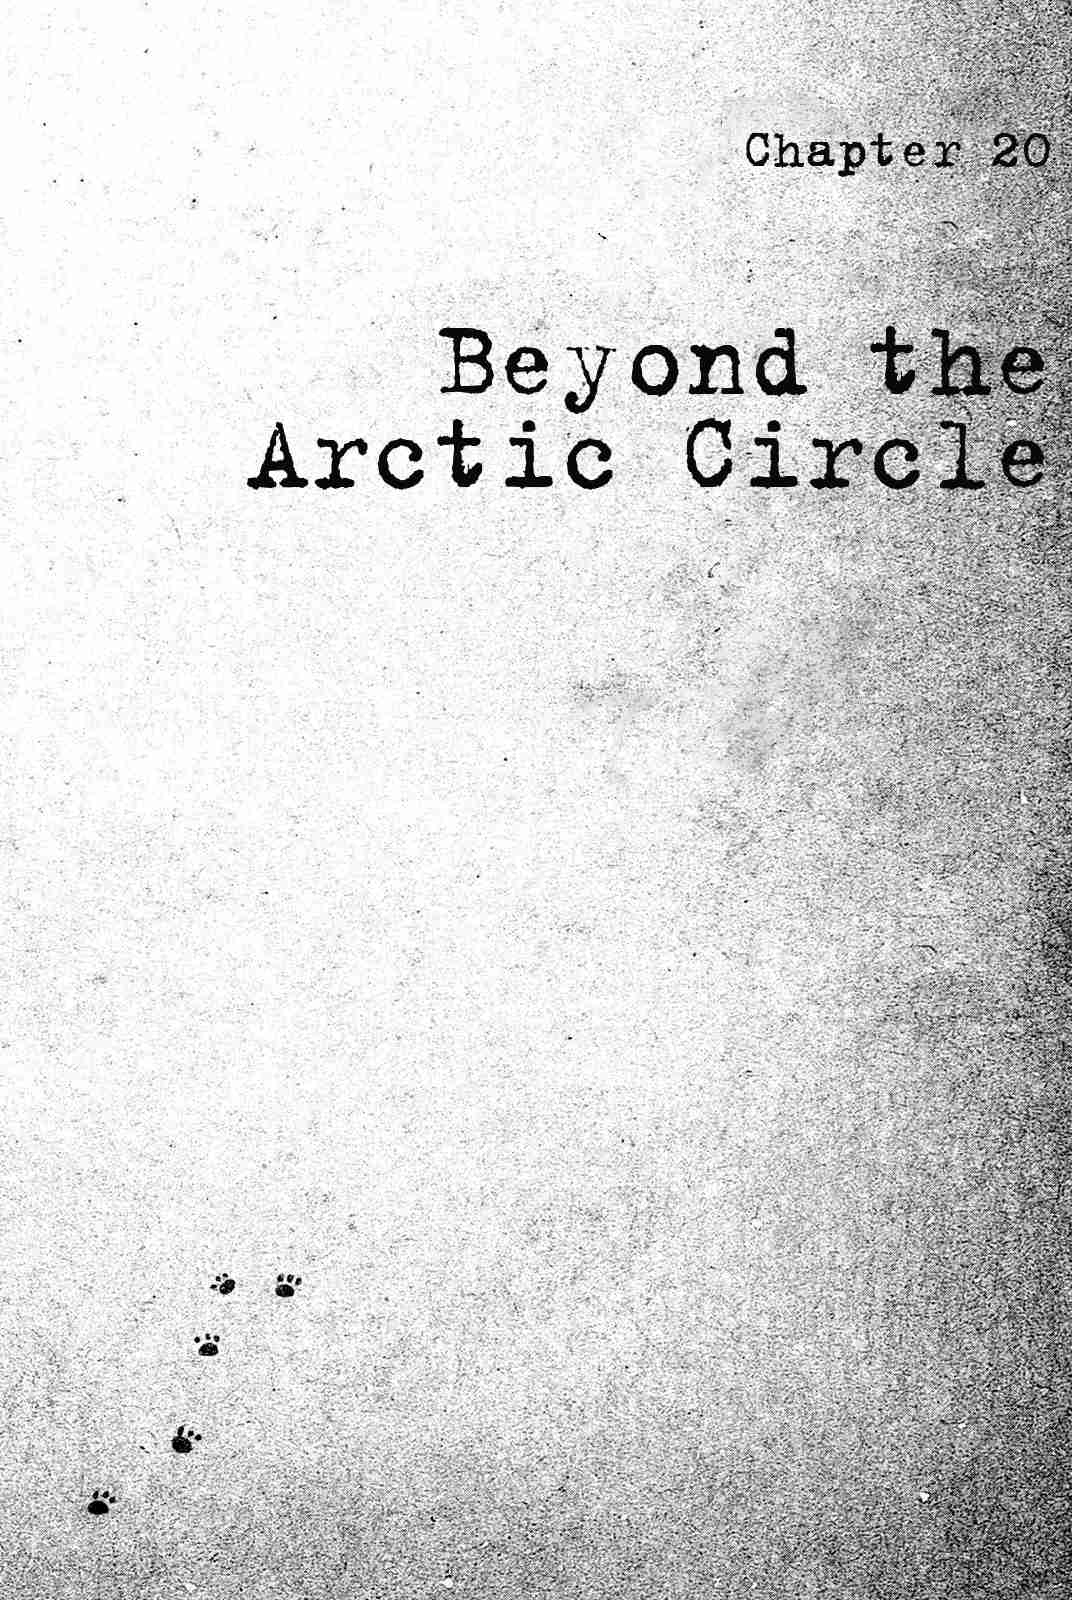 Guns and Stamps Vol. 3 Ch. 20 Beyond the Arctic Circle